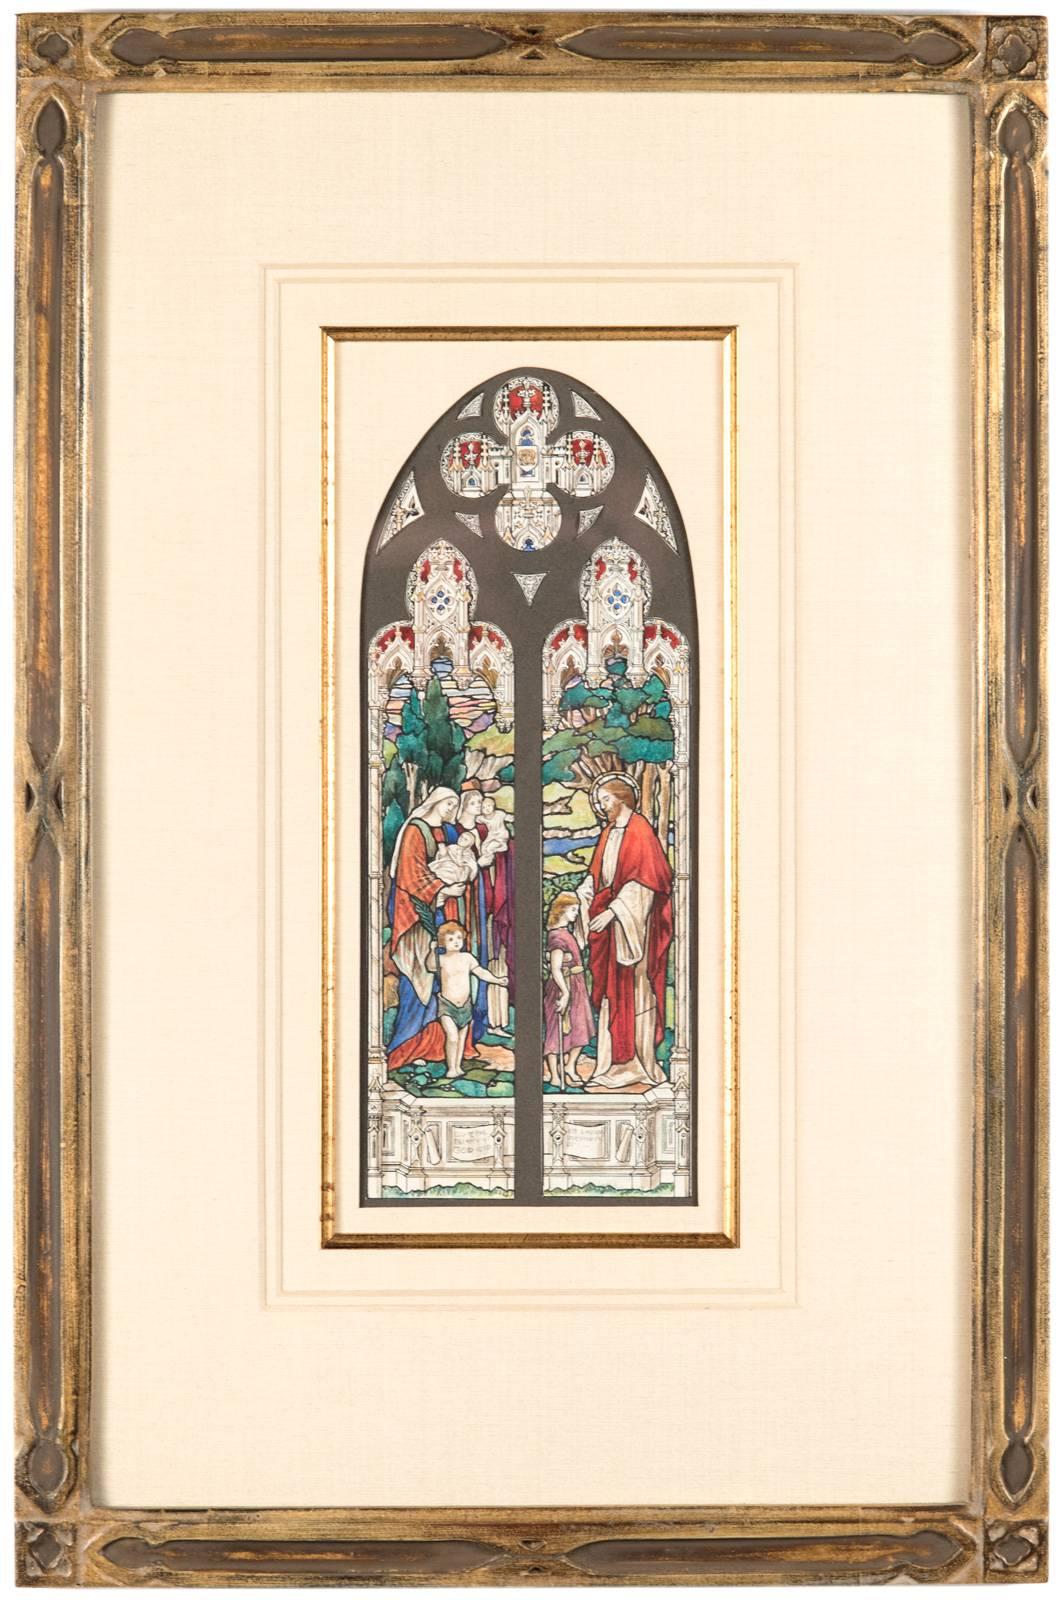 An original watercolor created by the artists Thomas William Camm (British, 1839-1912) for a Church commission. Camm is considered one of Great Britain's most talented designers of stained glass. Before production on a monumental work of stained